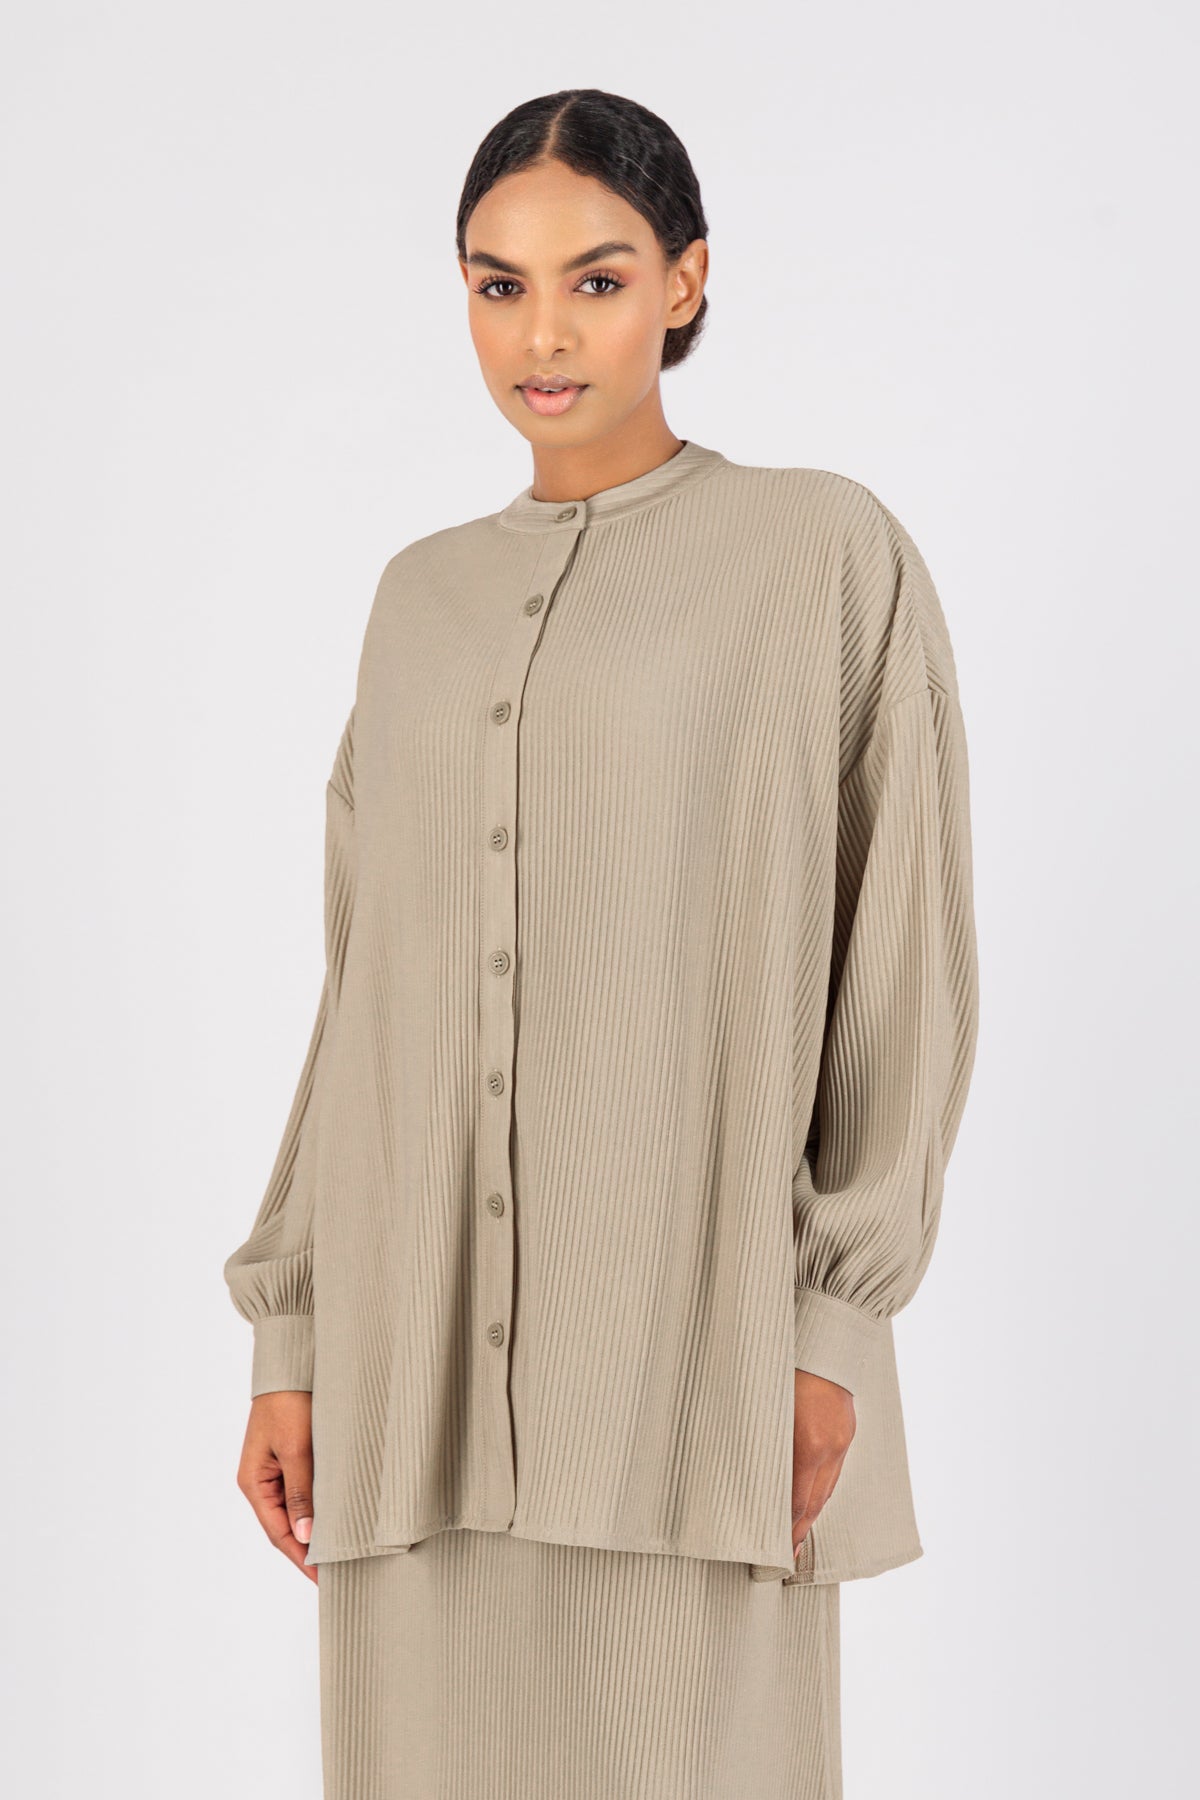 US - Pleated Button Up - Natural